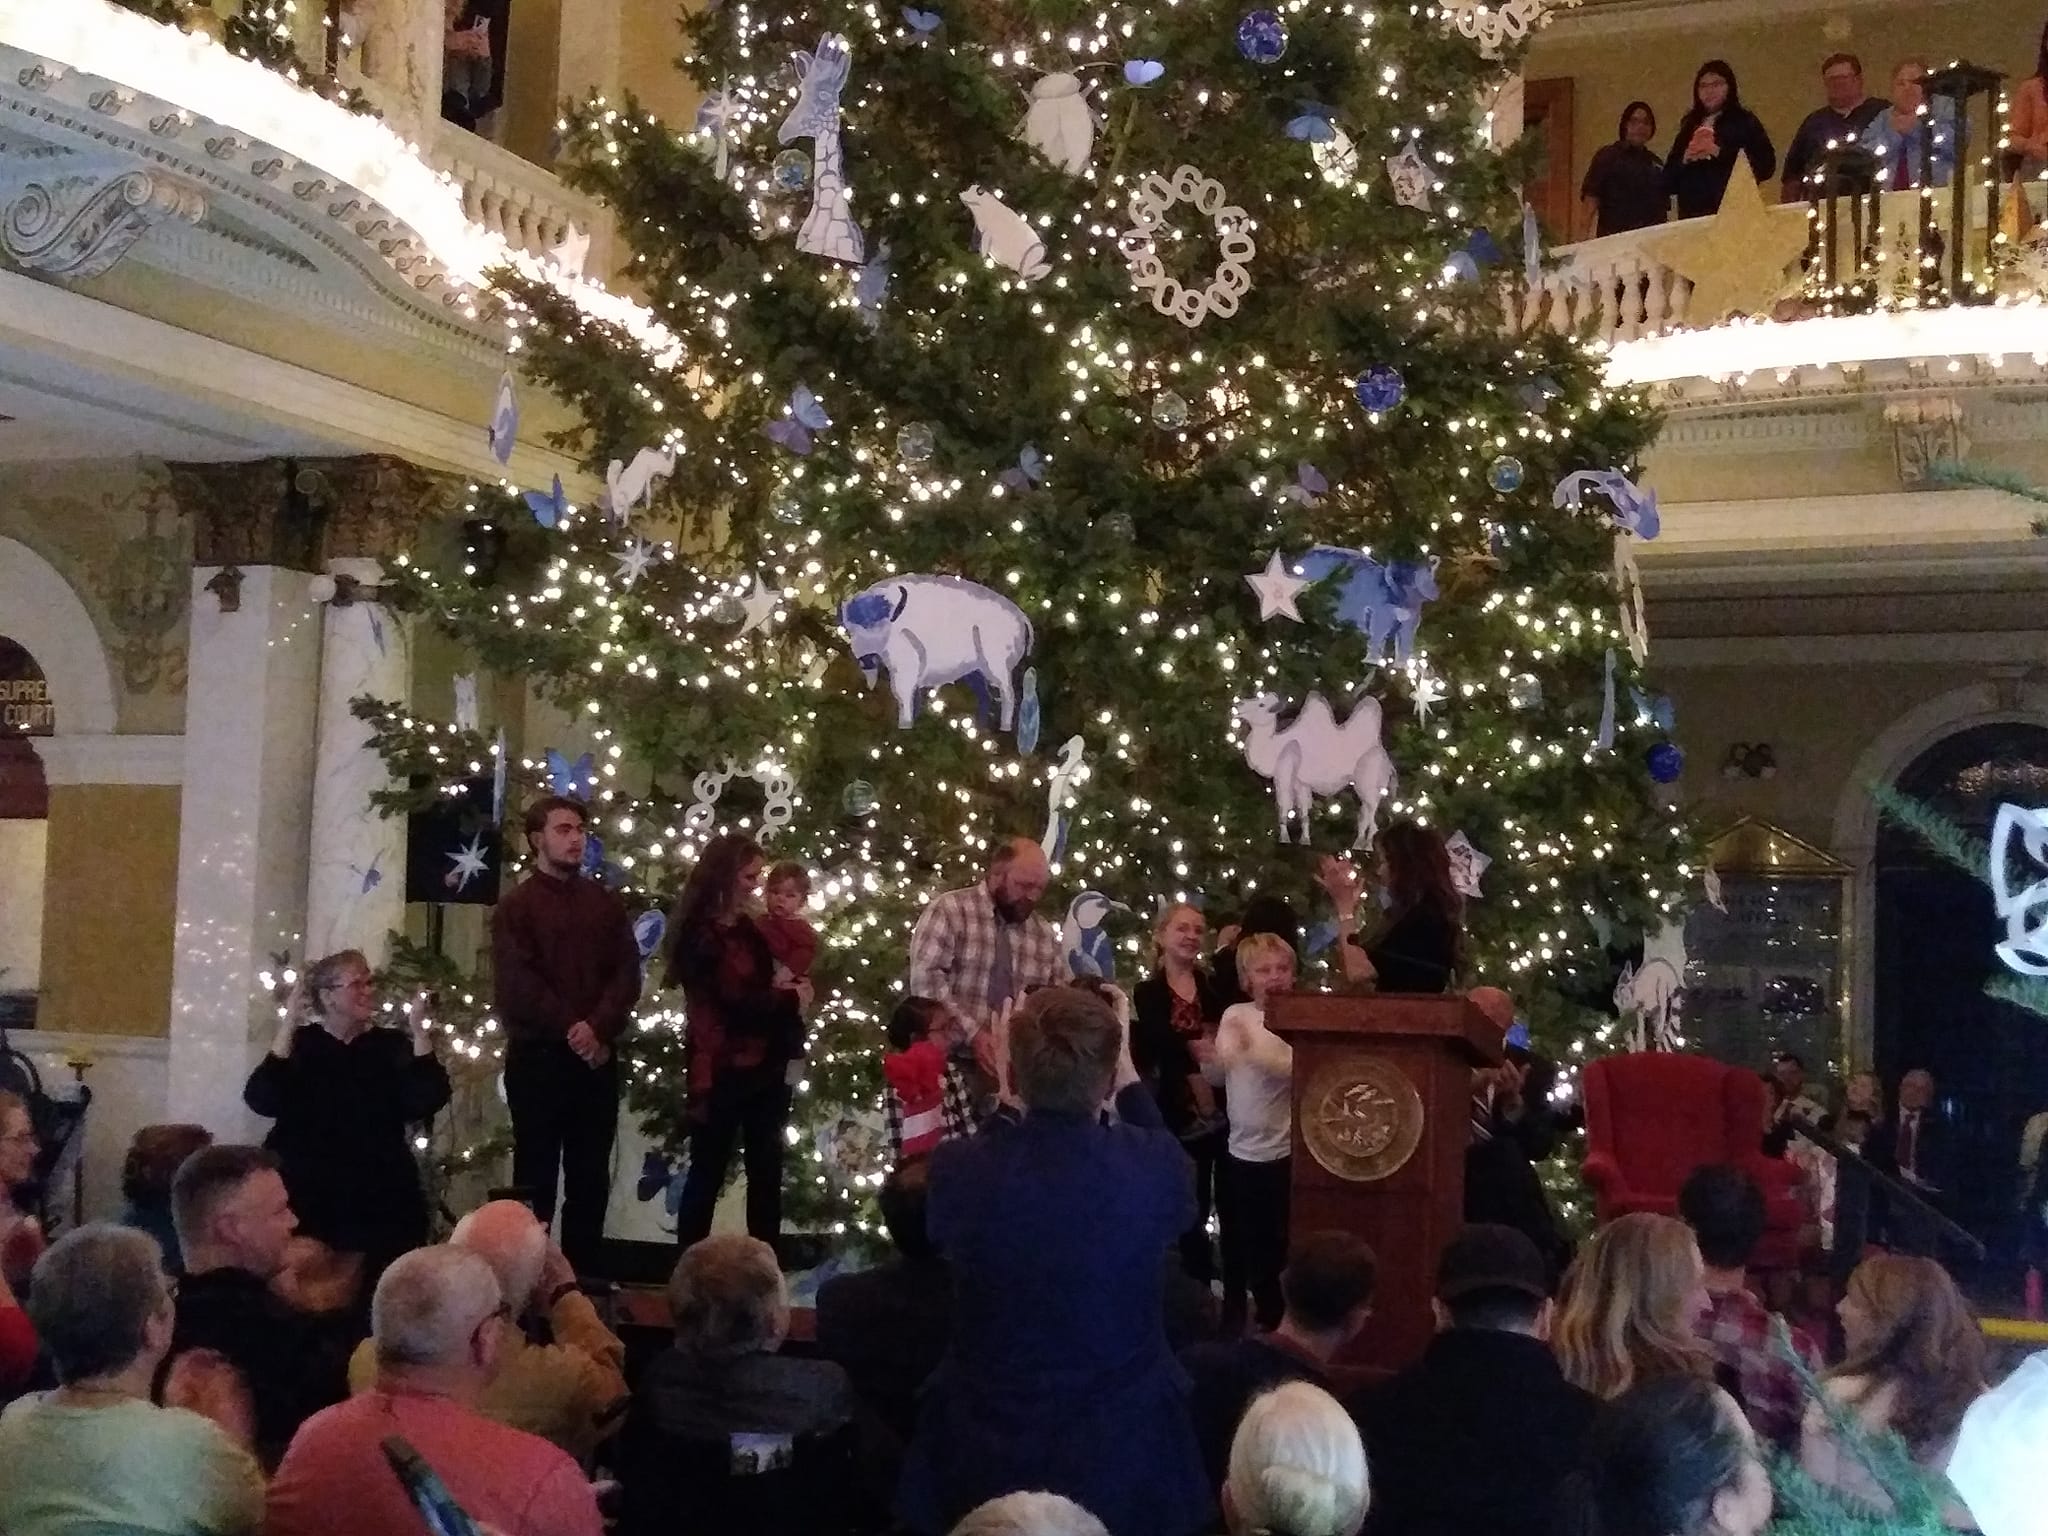 Grand Lighting Ceremony Kicks Off The 2023 Christmas At The Capitol